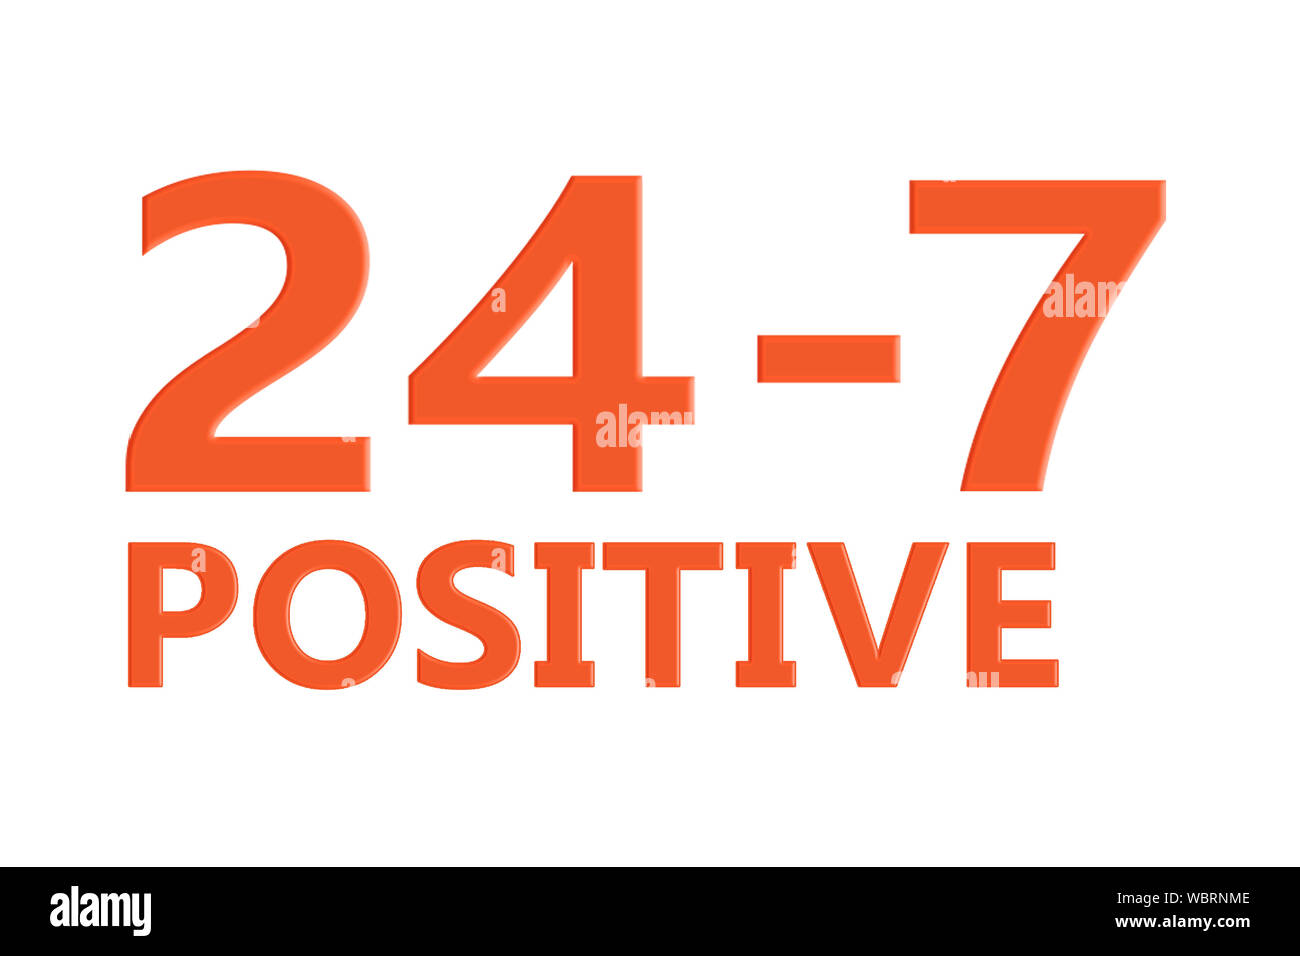 Inspirational positive emotion typographic concept design in orange and white colors Stock Photo